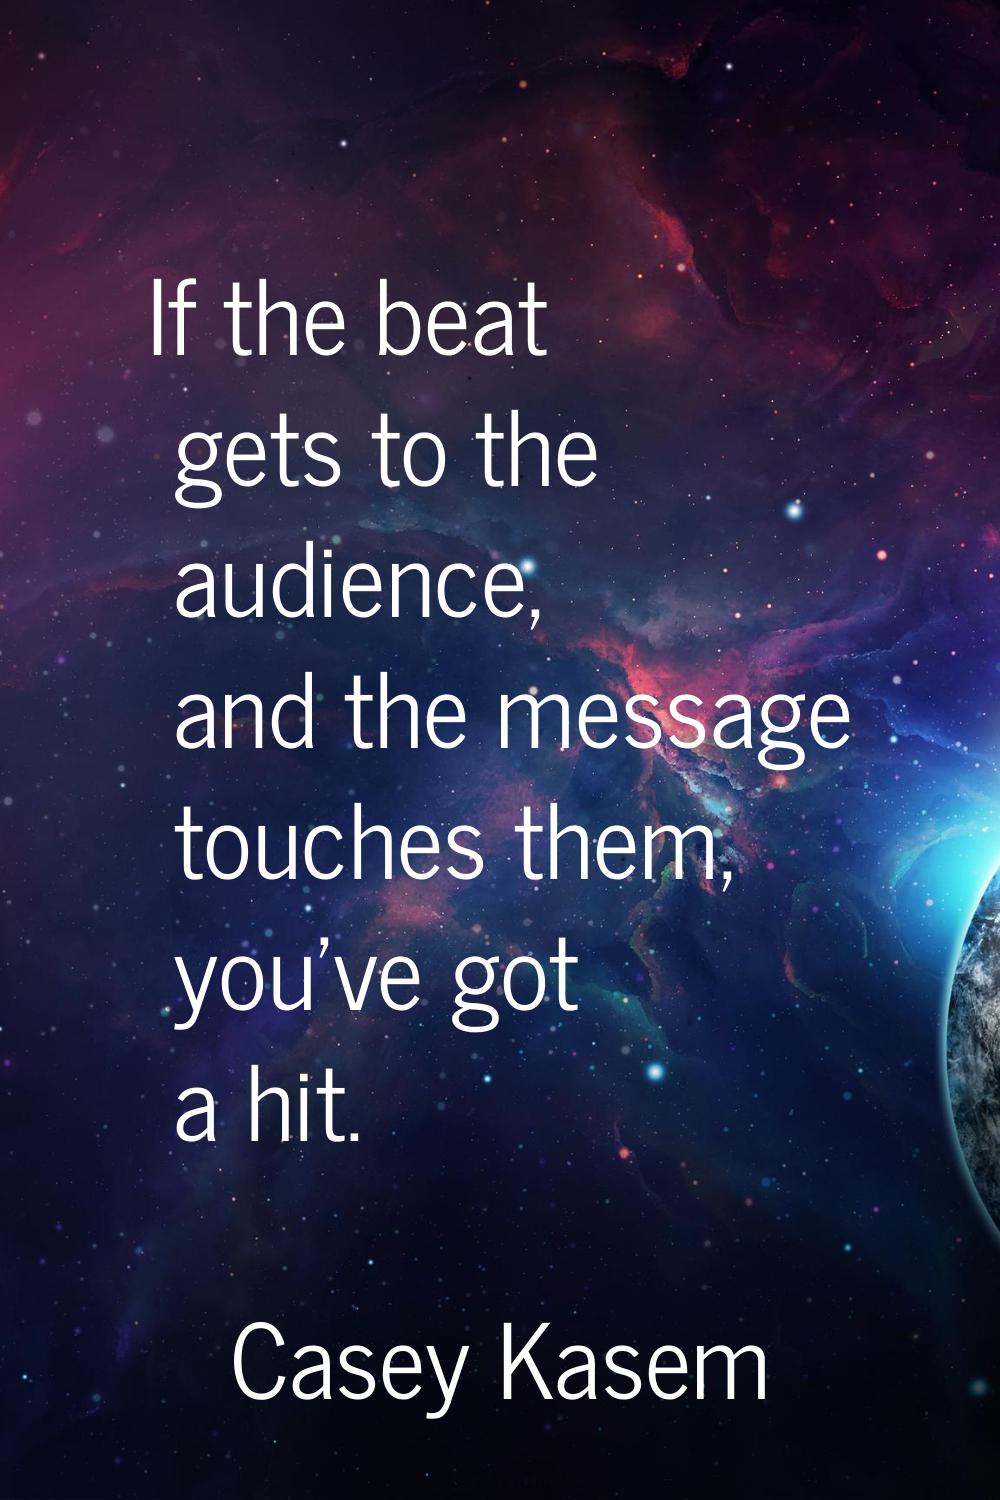 If the beat gets to the audience, and the message touches them, you've got a hit.